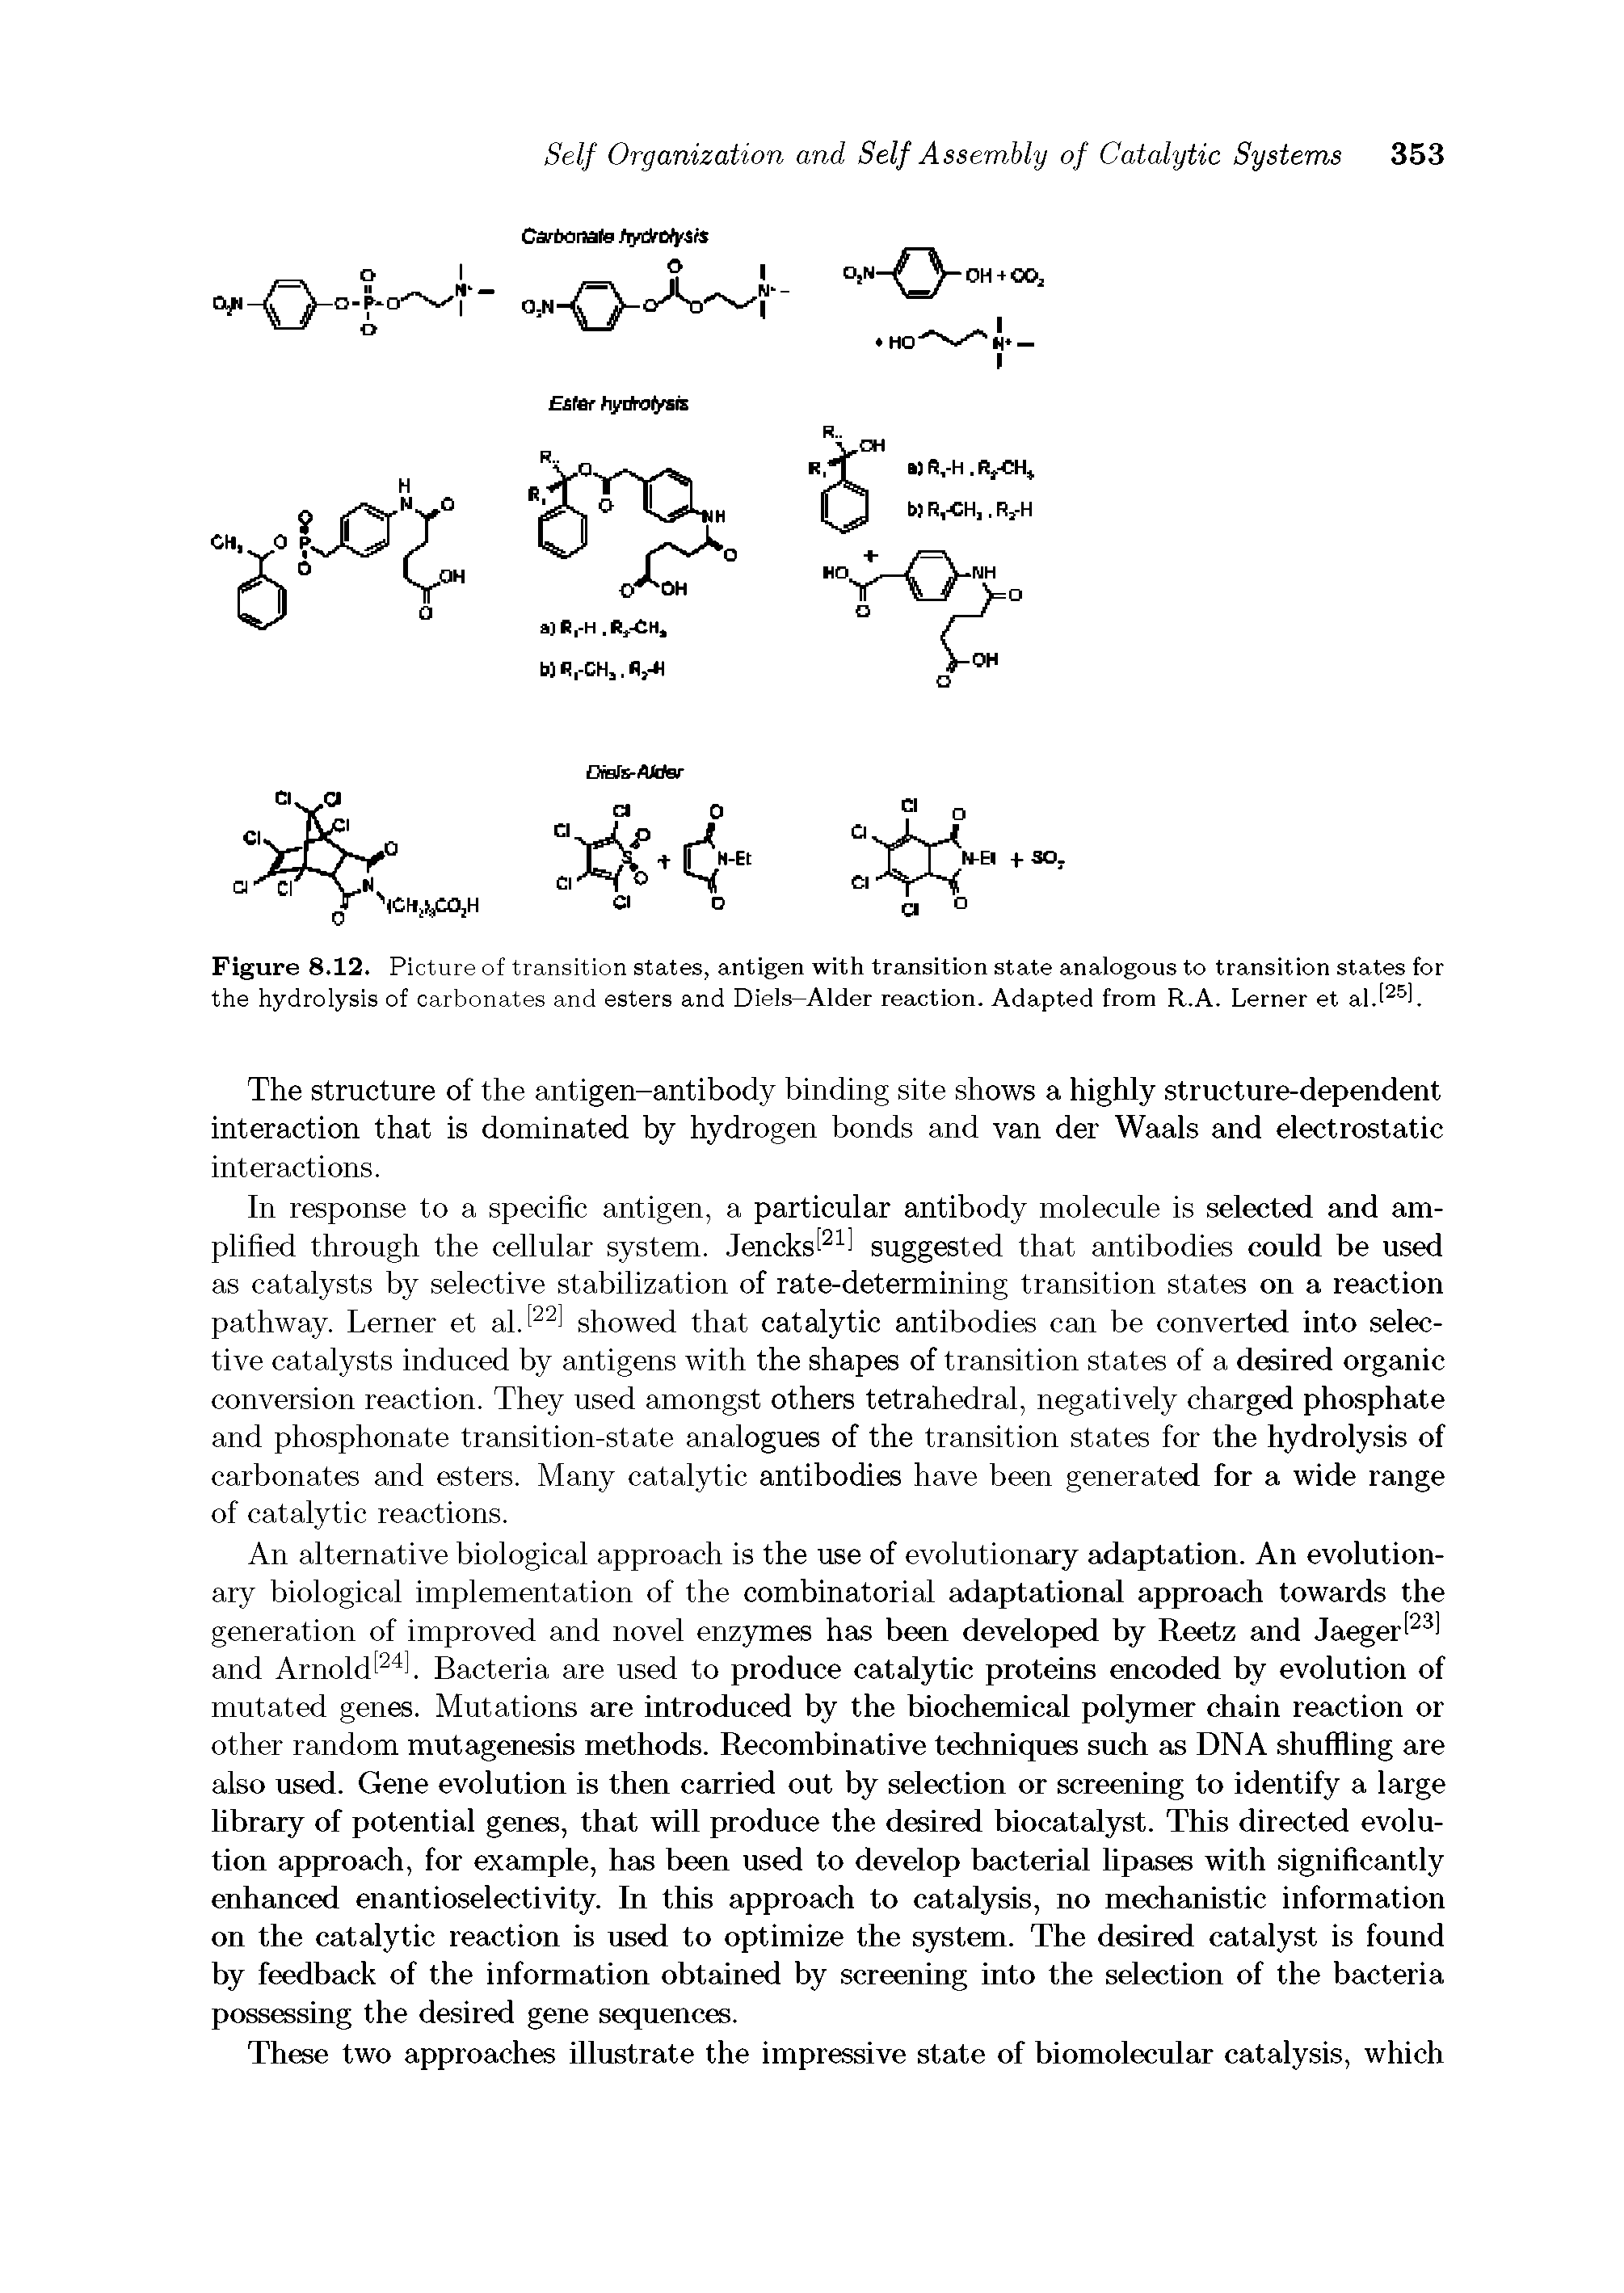 Figure 8.12. Picture of transition states, antigen with transition state analogous to transition states for the hydrolysis of carbonates and esters and Diels—Alder reaction. Adapted from R.A. Lerner et...